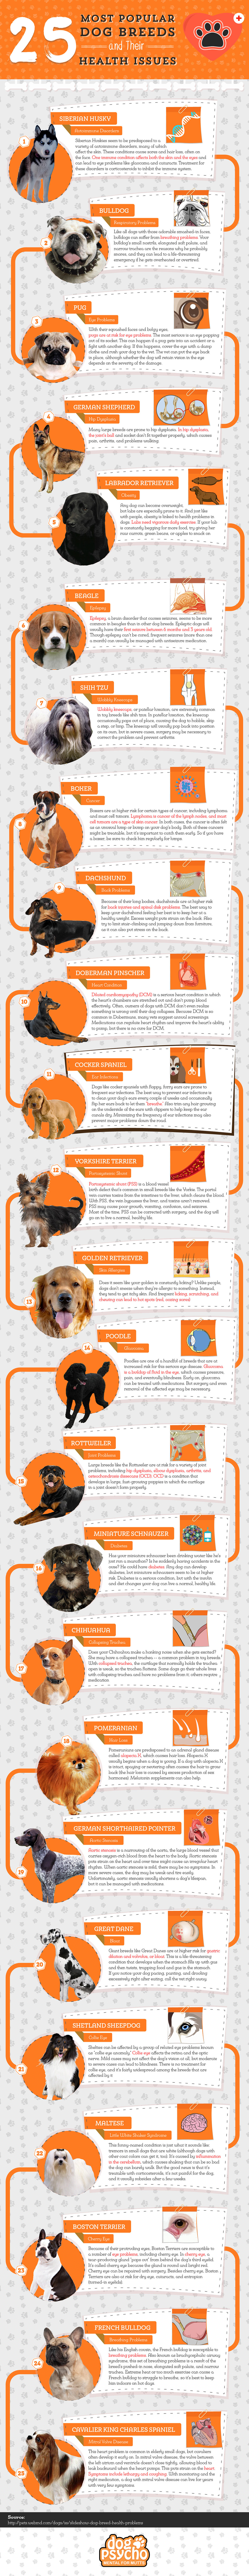 25 Most Popular Dog Breeds and Their Health Issues Infographic